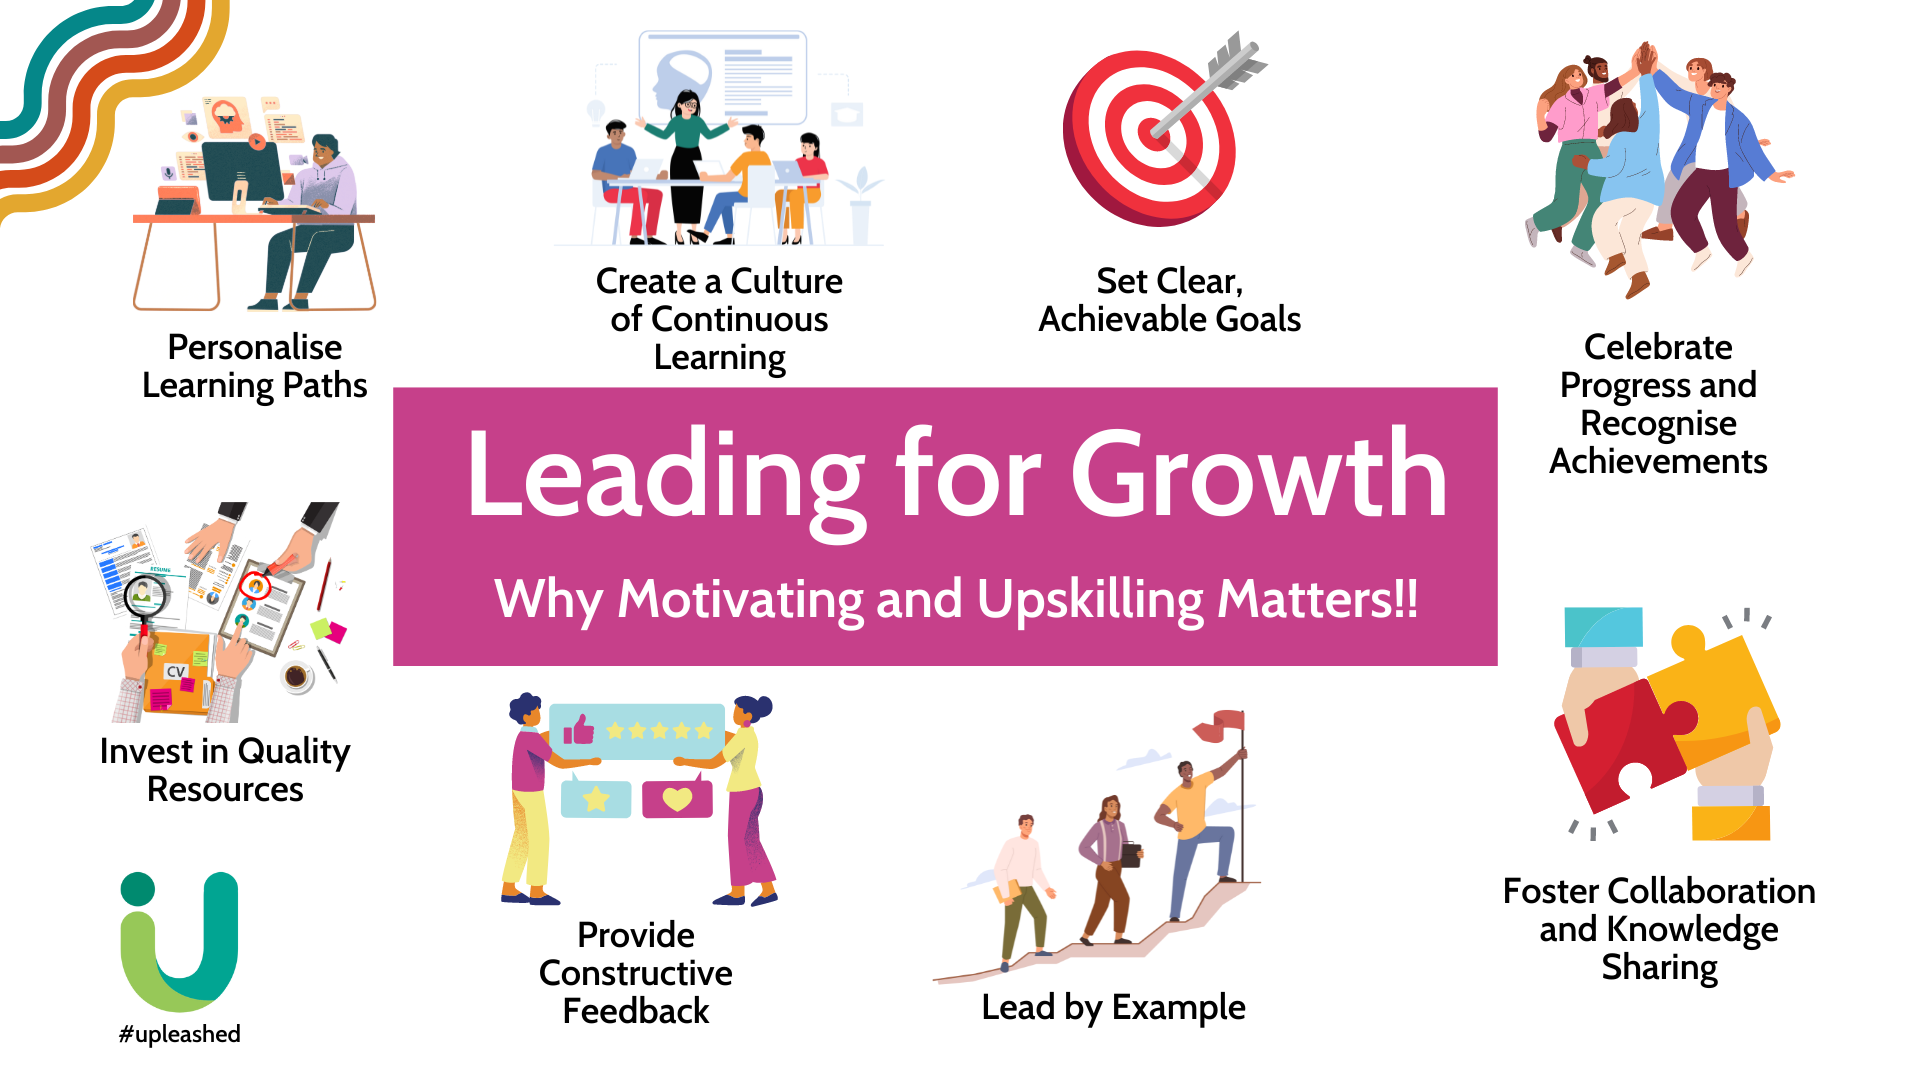 Leading for growth - why motivating and upskilling matters - and what you should be doing as an effective leader.